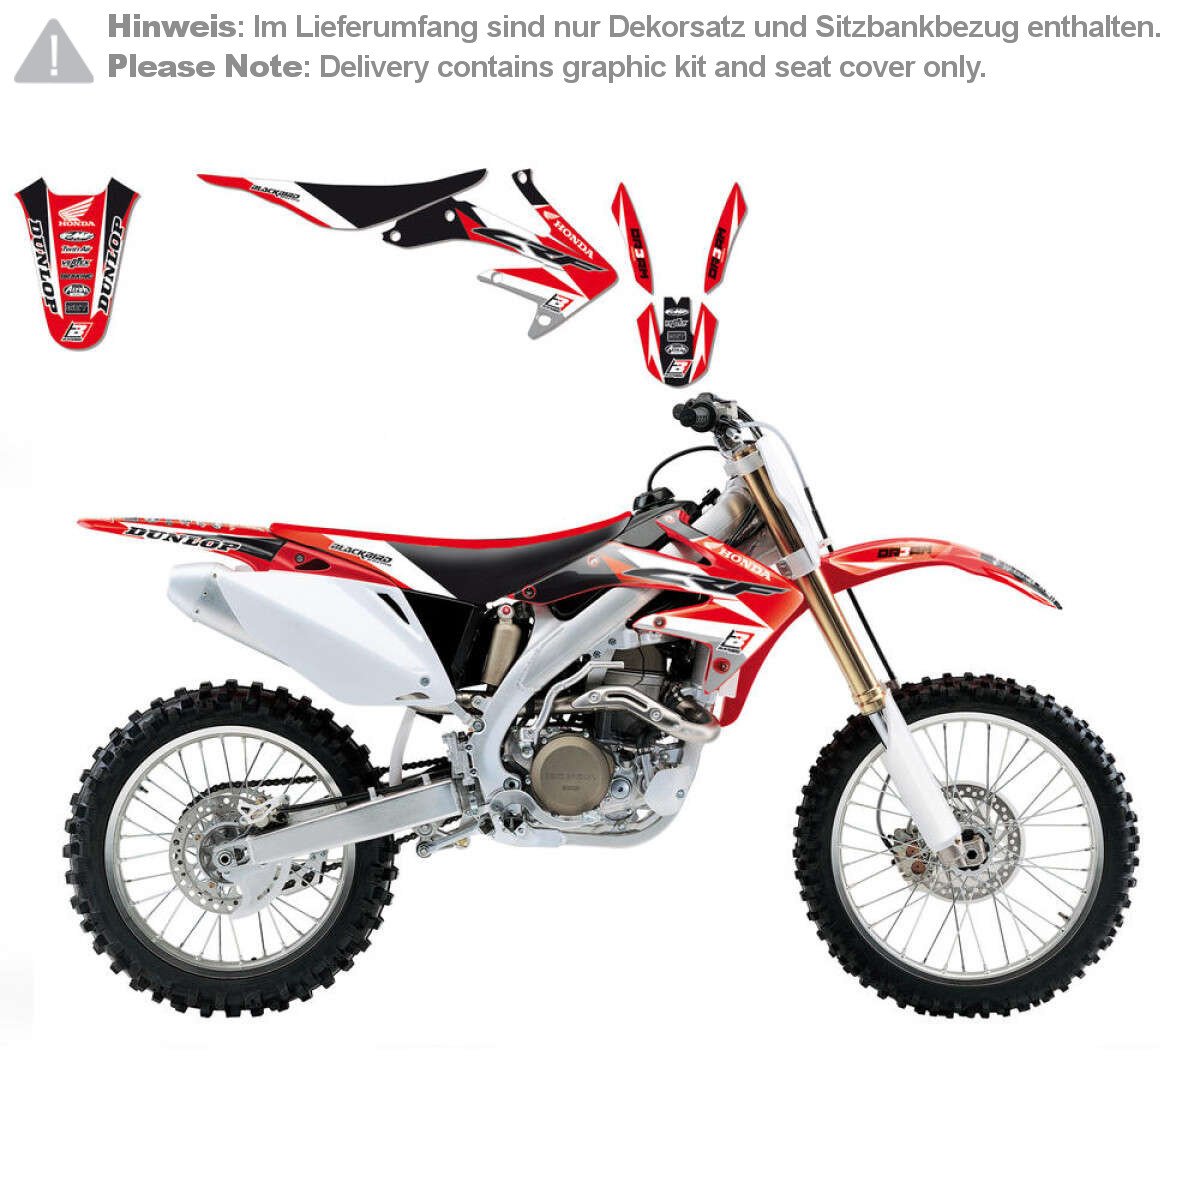 Blackbird Racing Graphic Kit with Seat Cover Dream 3 Honda CR-F 450 05-08, Red/Black/White